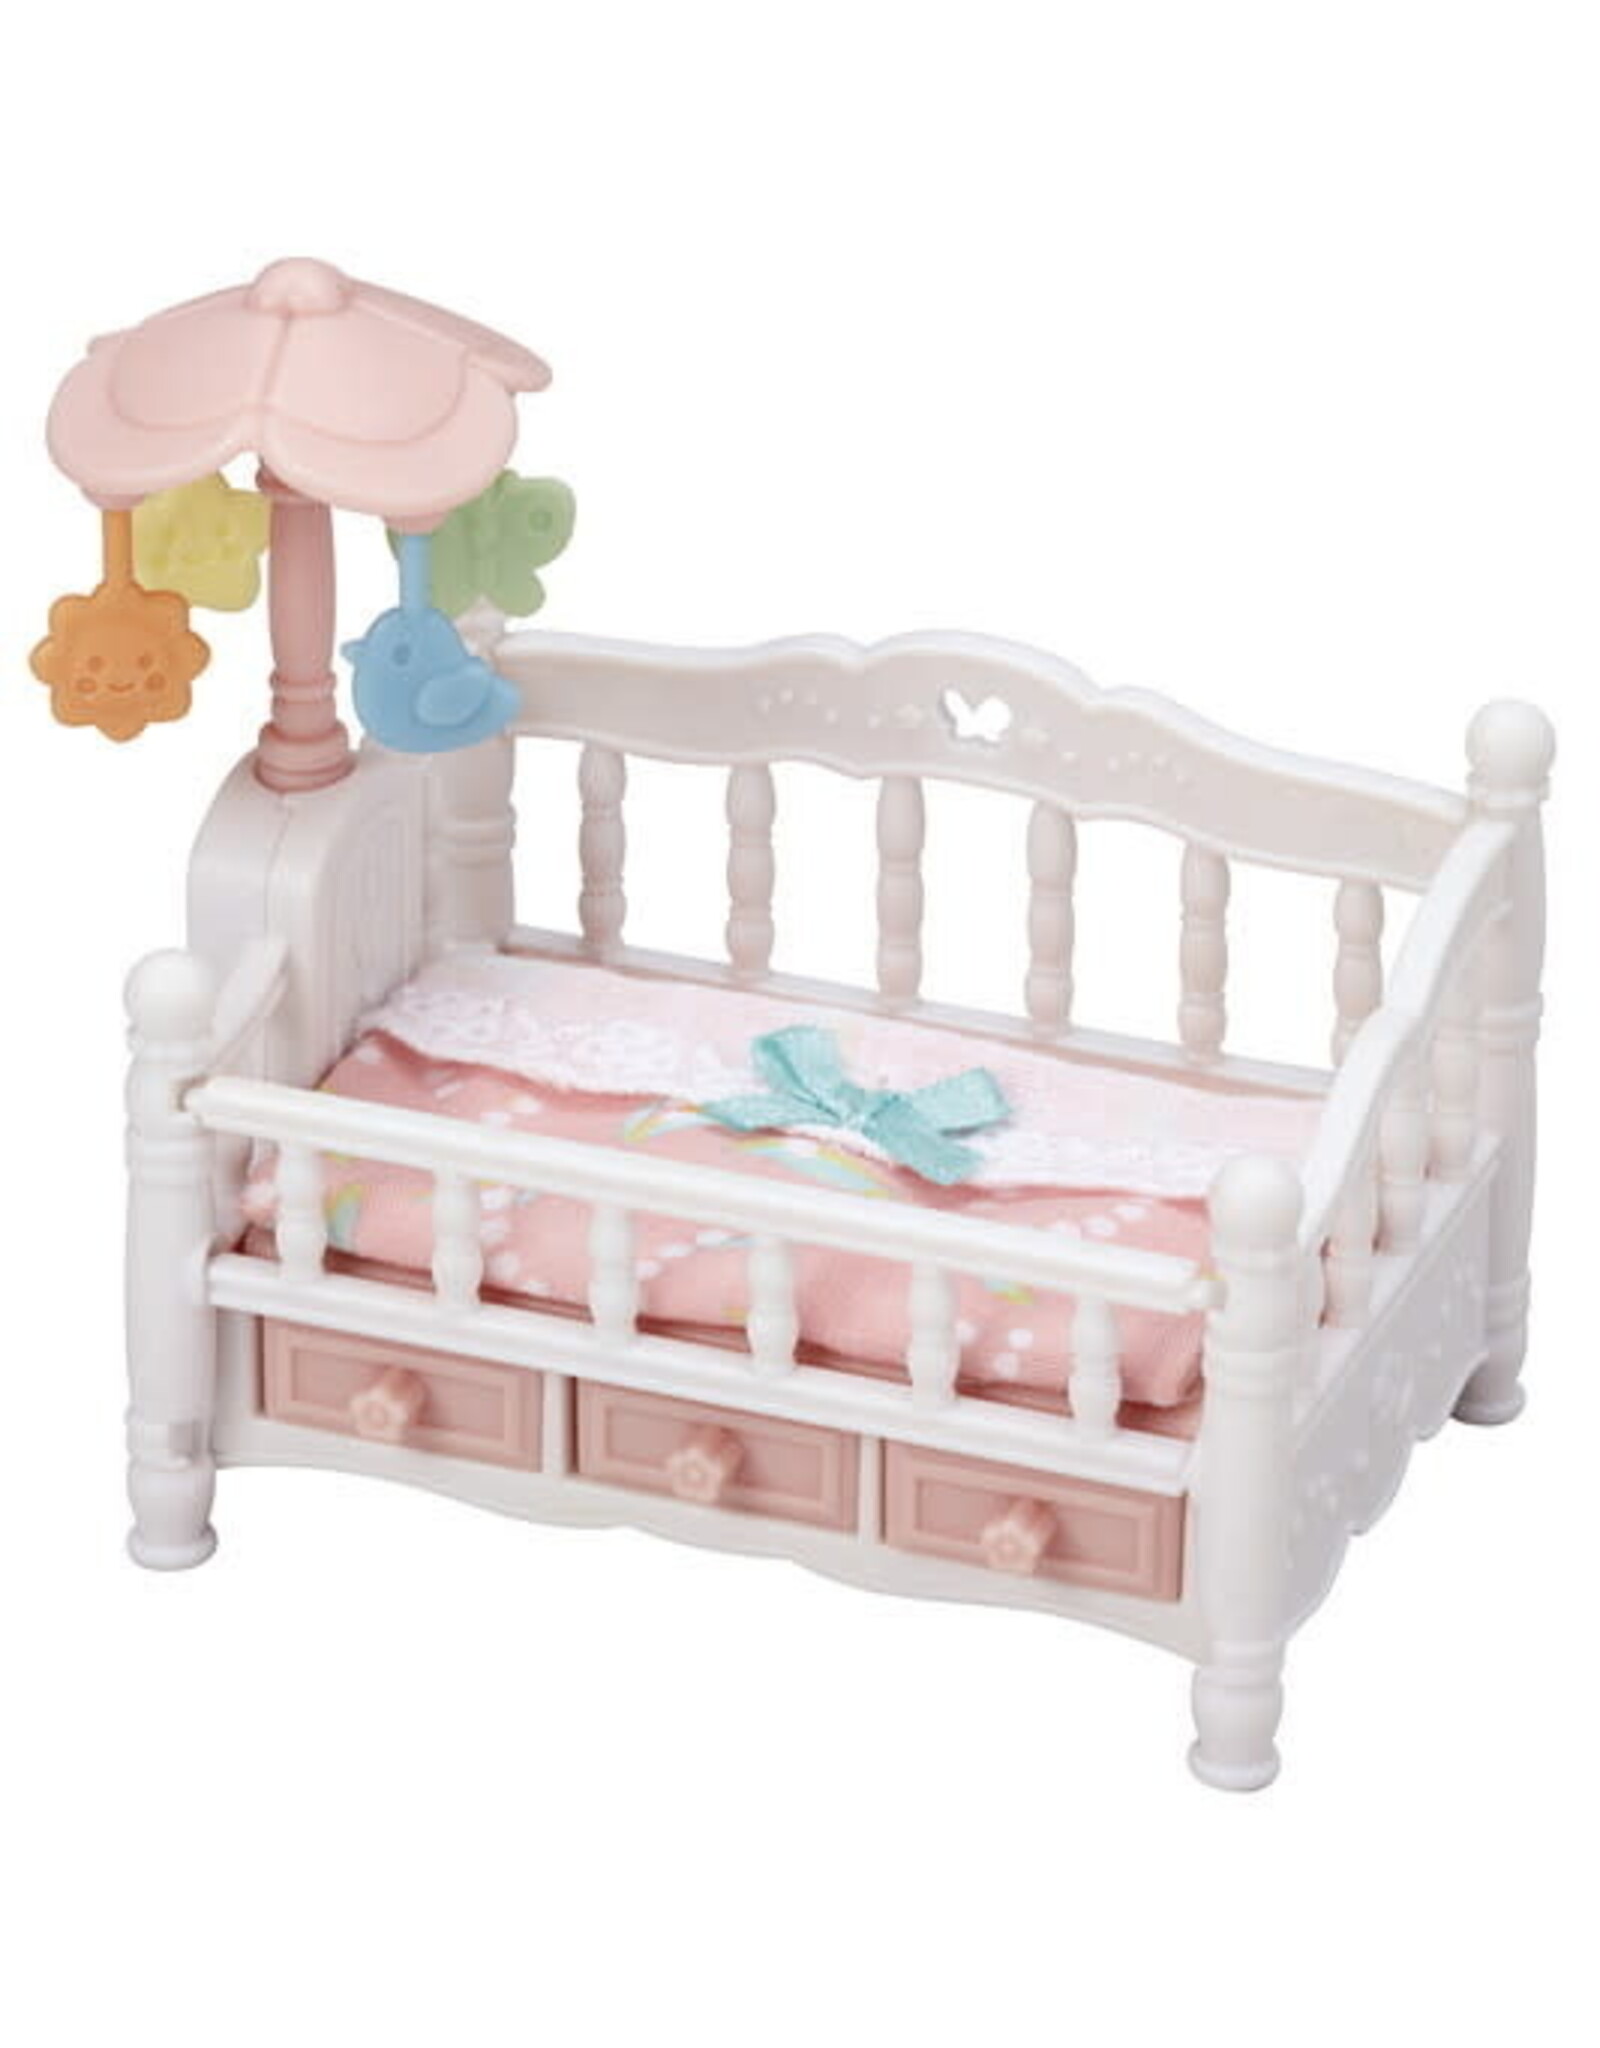 Calico Critters: Crib With Mobile